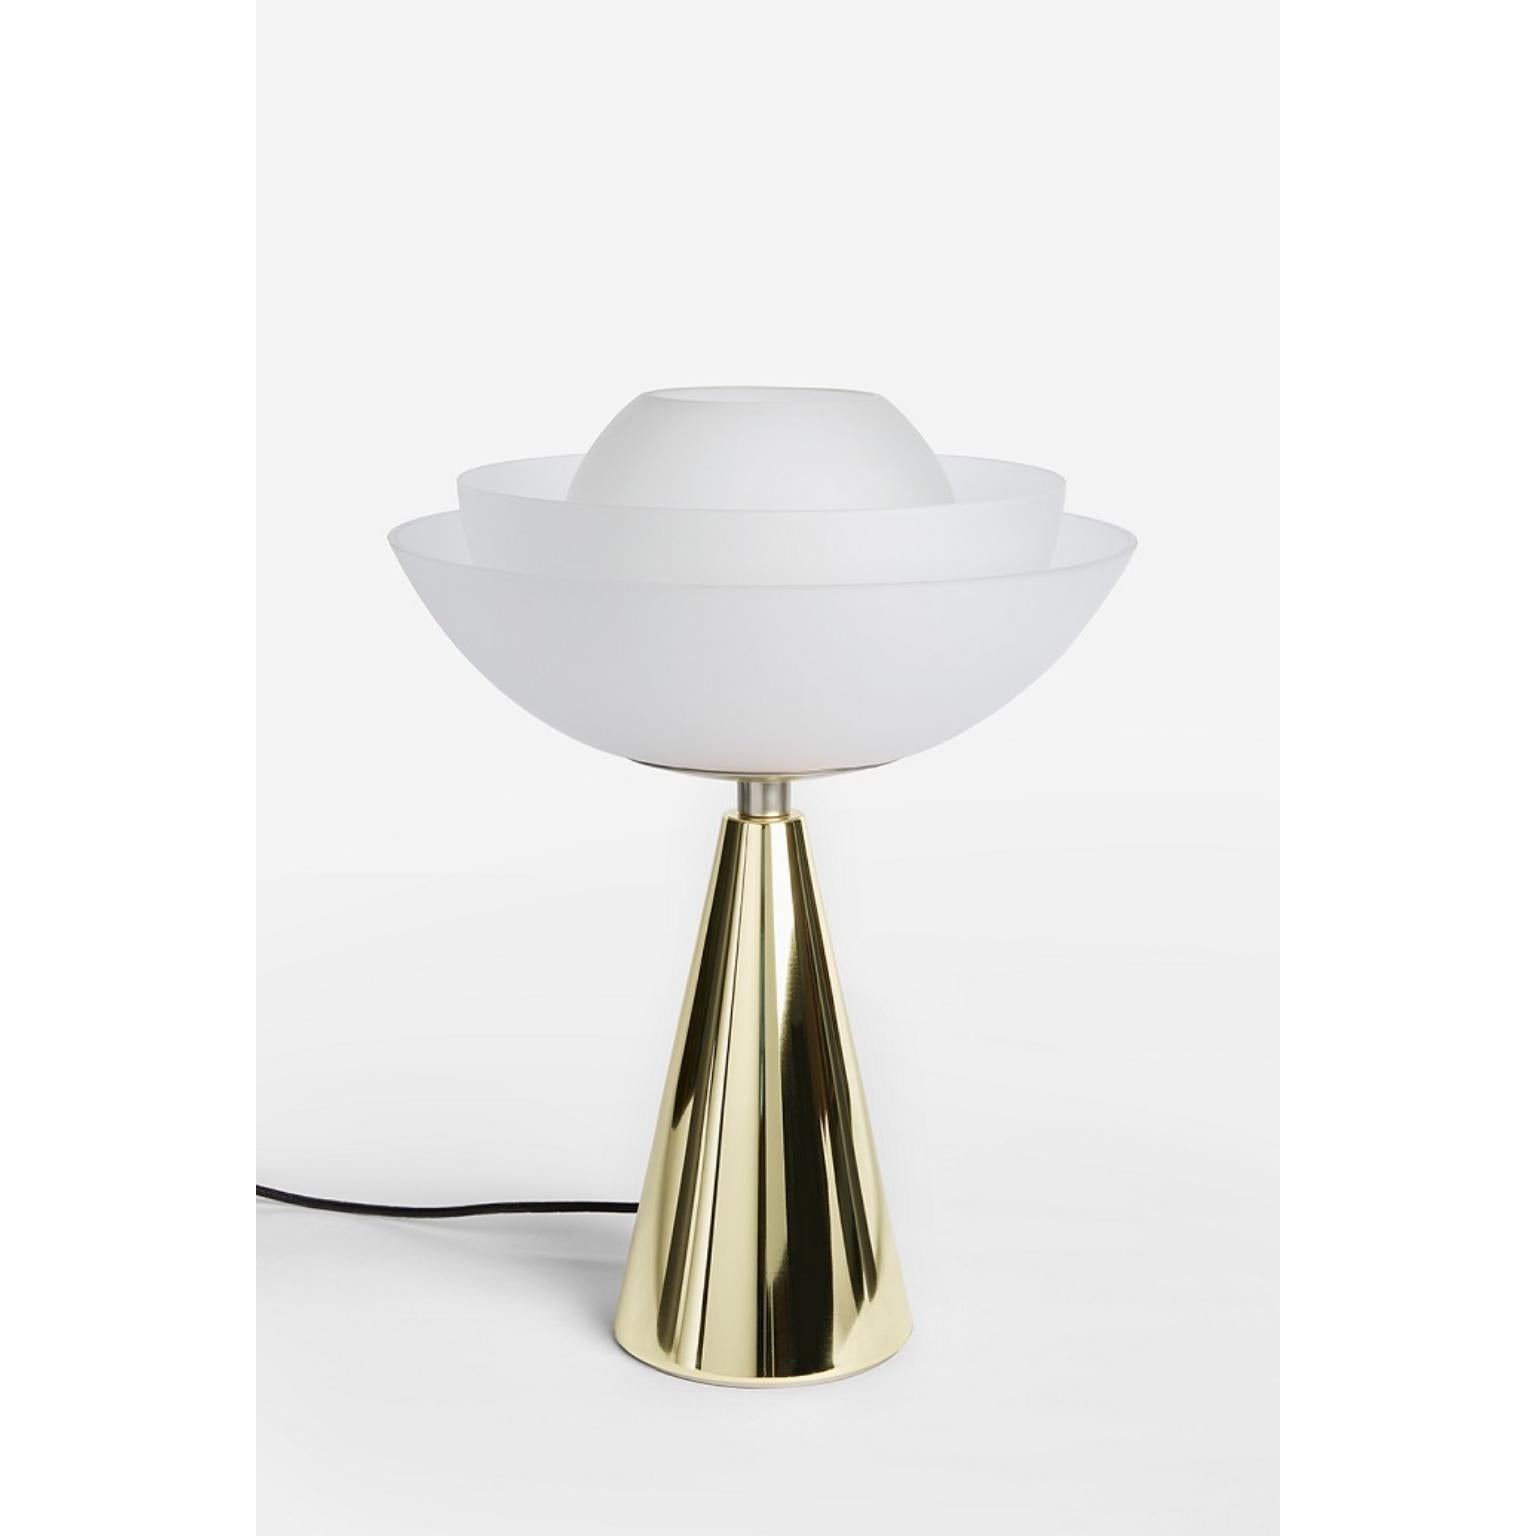 Pair Lotus table lamps by Mason Editions
Dimensions: 36 × 48 cm
Materials: matte gold 24k base + transparent smoke grey blown glass
Finishings: 
matte gold 24k base + transparent smoke grey blown glass
polished champagne gold base + transparent